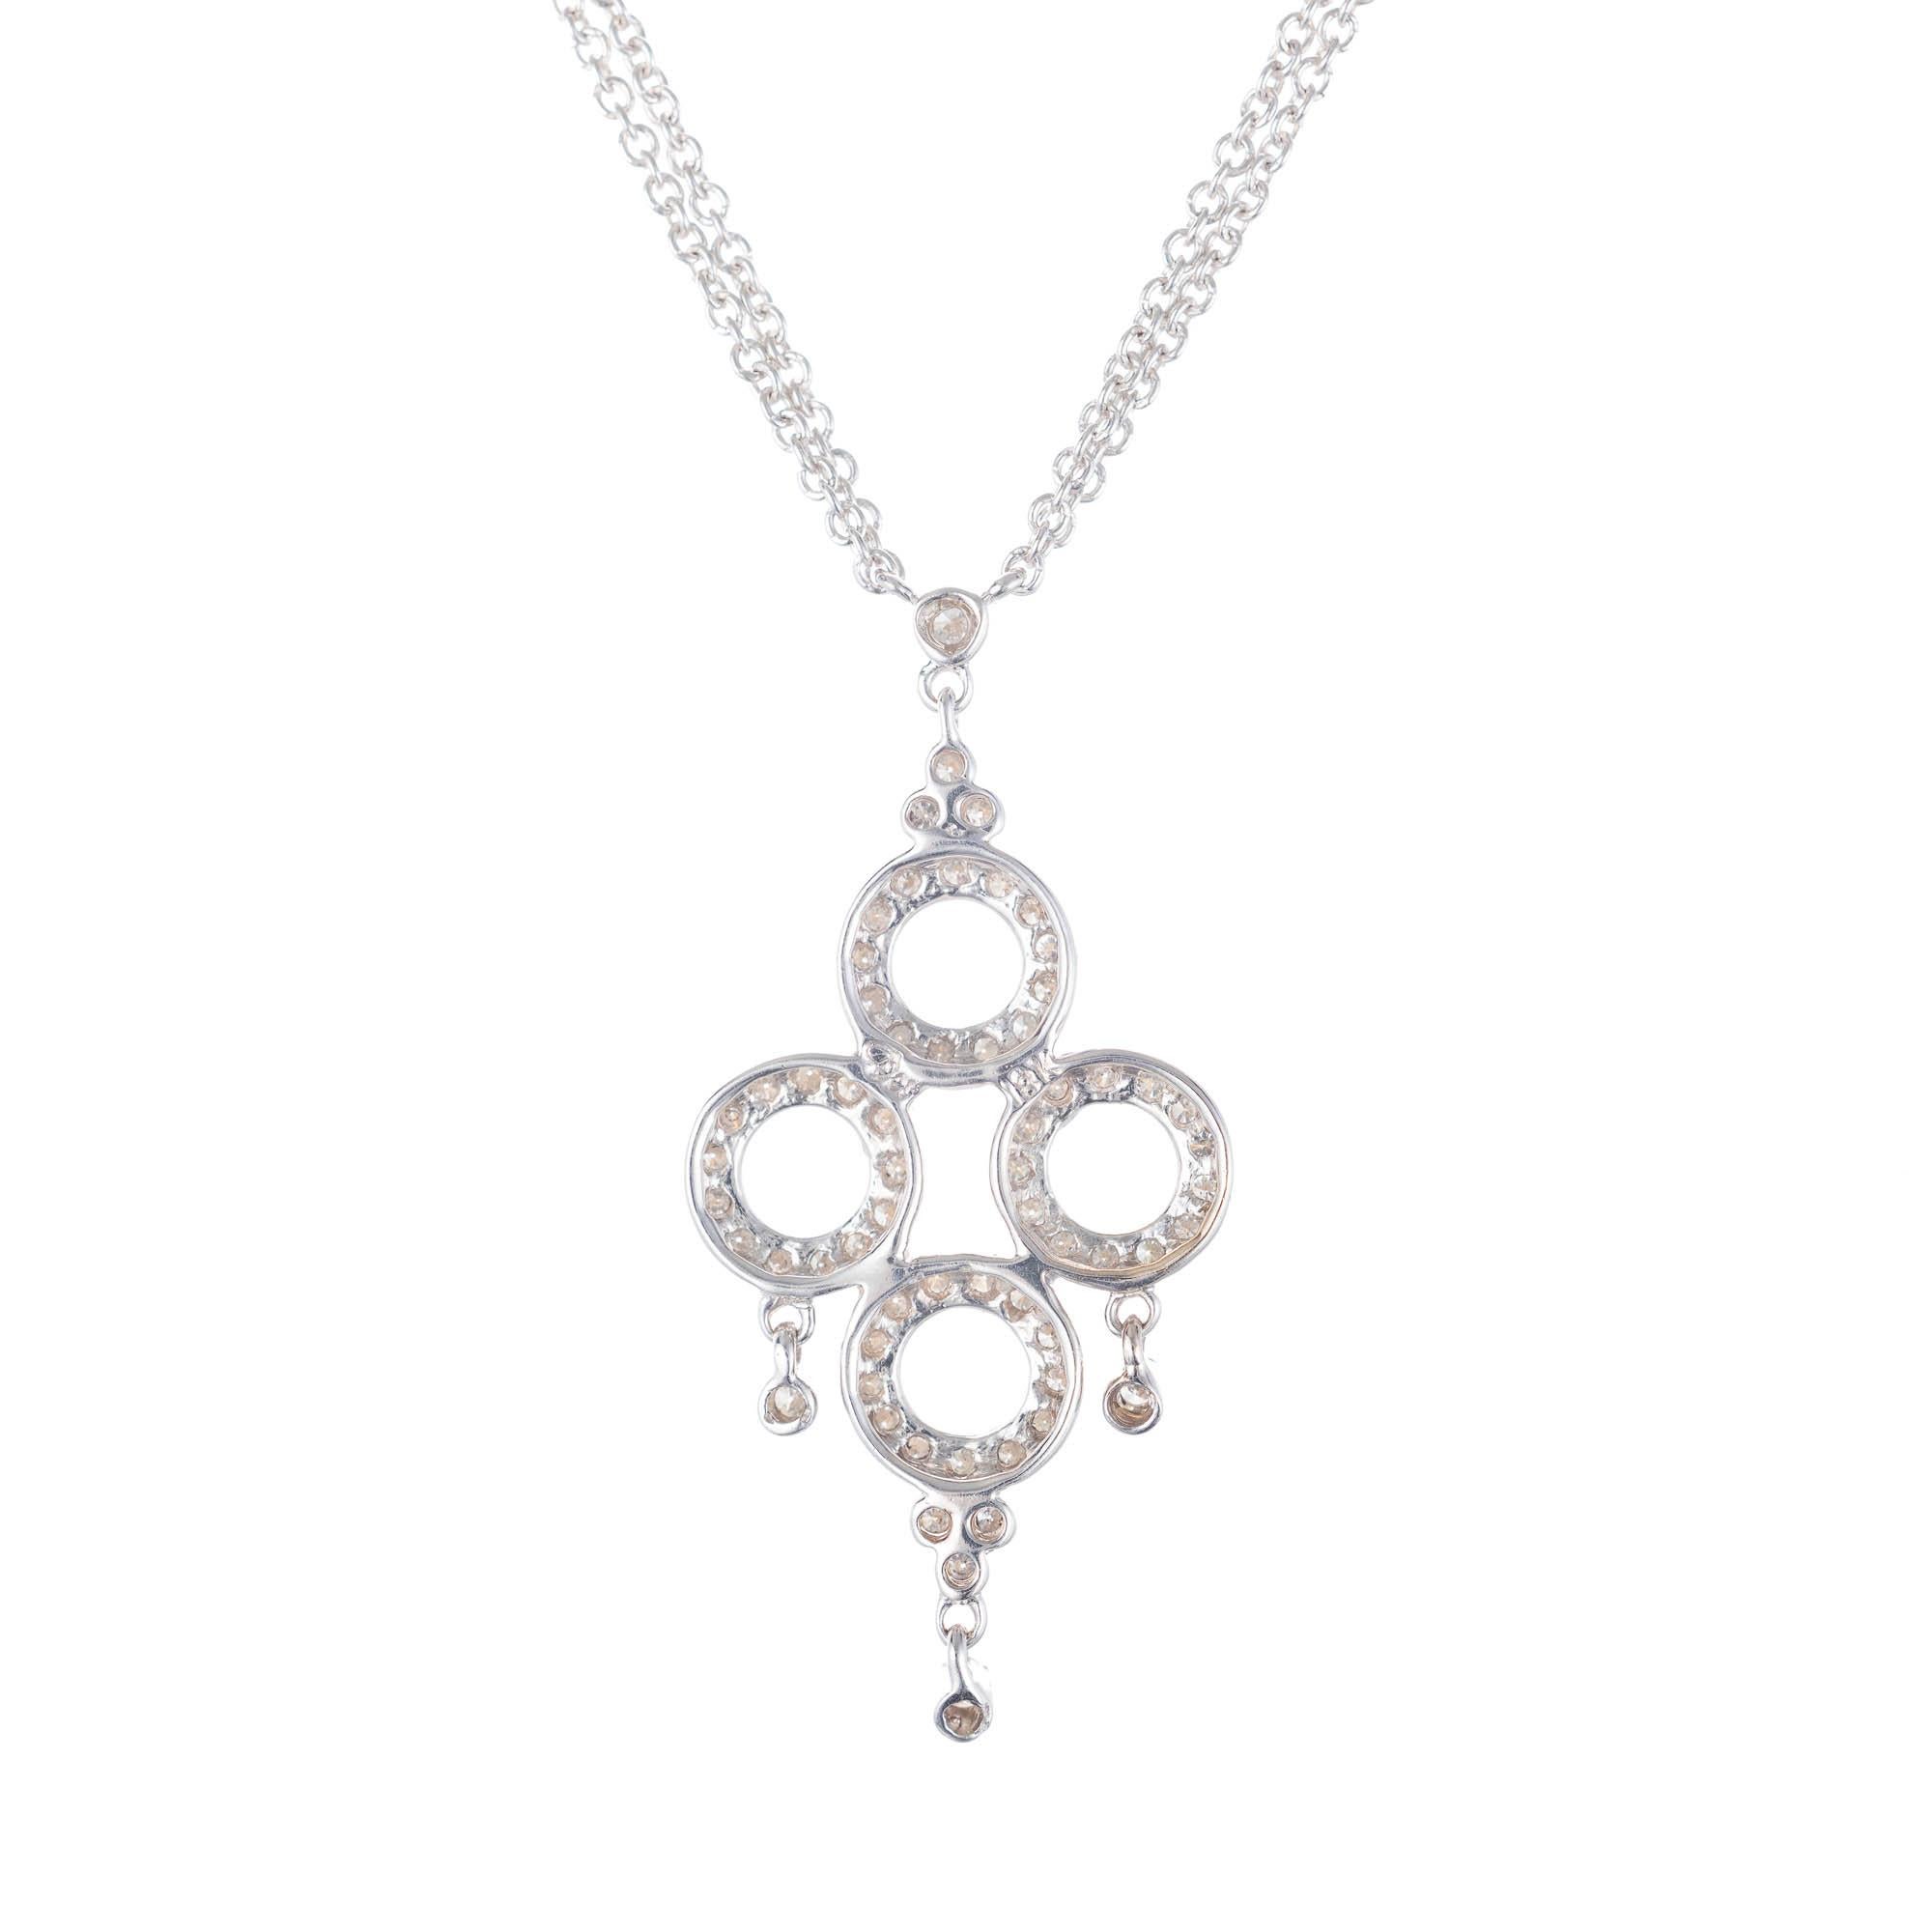 Dev Valencia diamond four circle pendant with an 18k white gold with 16 Inch double chain. 

62 round H-I SI diamonds, Approximate .32 carats 
Chain: 16 Inch Double Chain 
18k White Gold 
Stamped: 18k 750
Hallmark: Dee Valencia 
Top to Bottom: